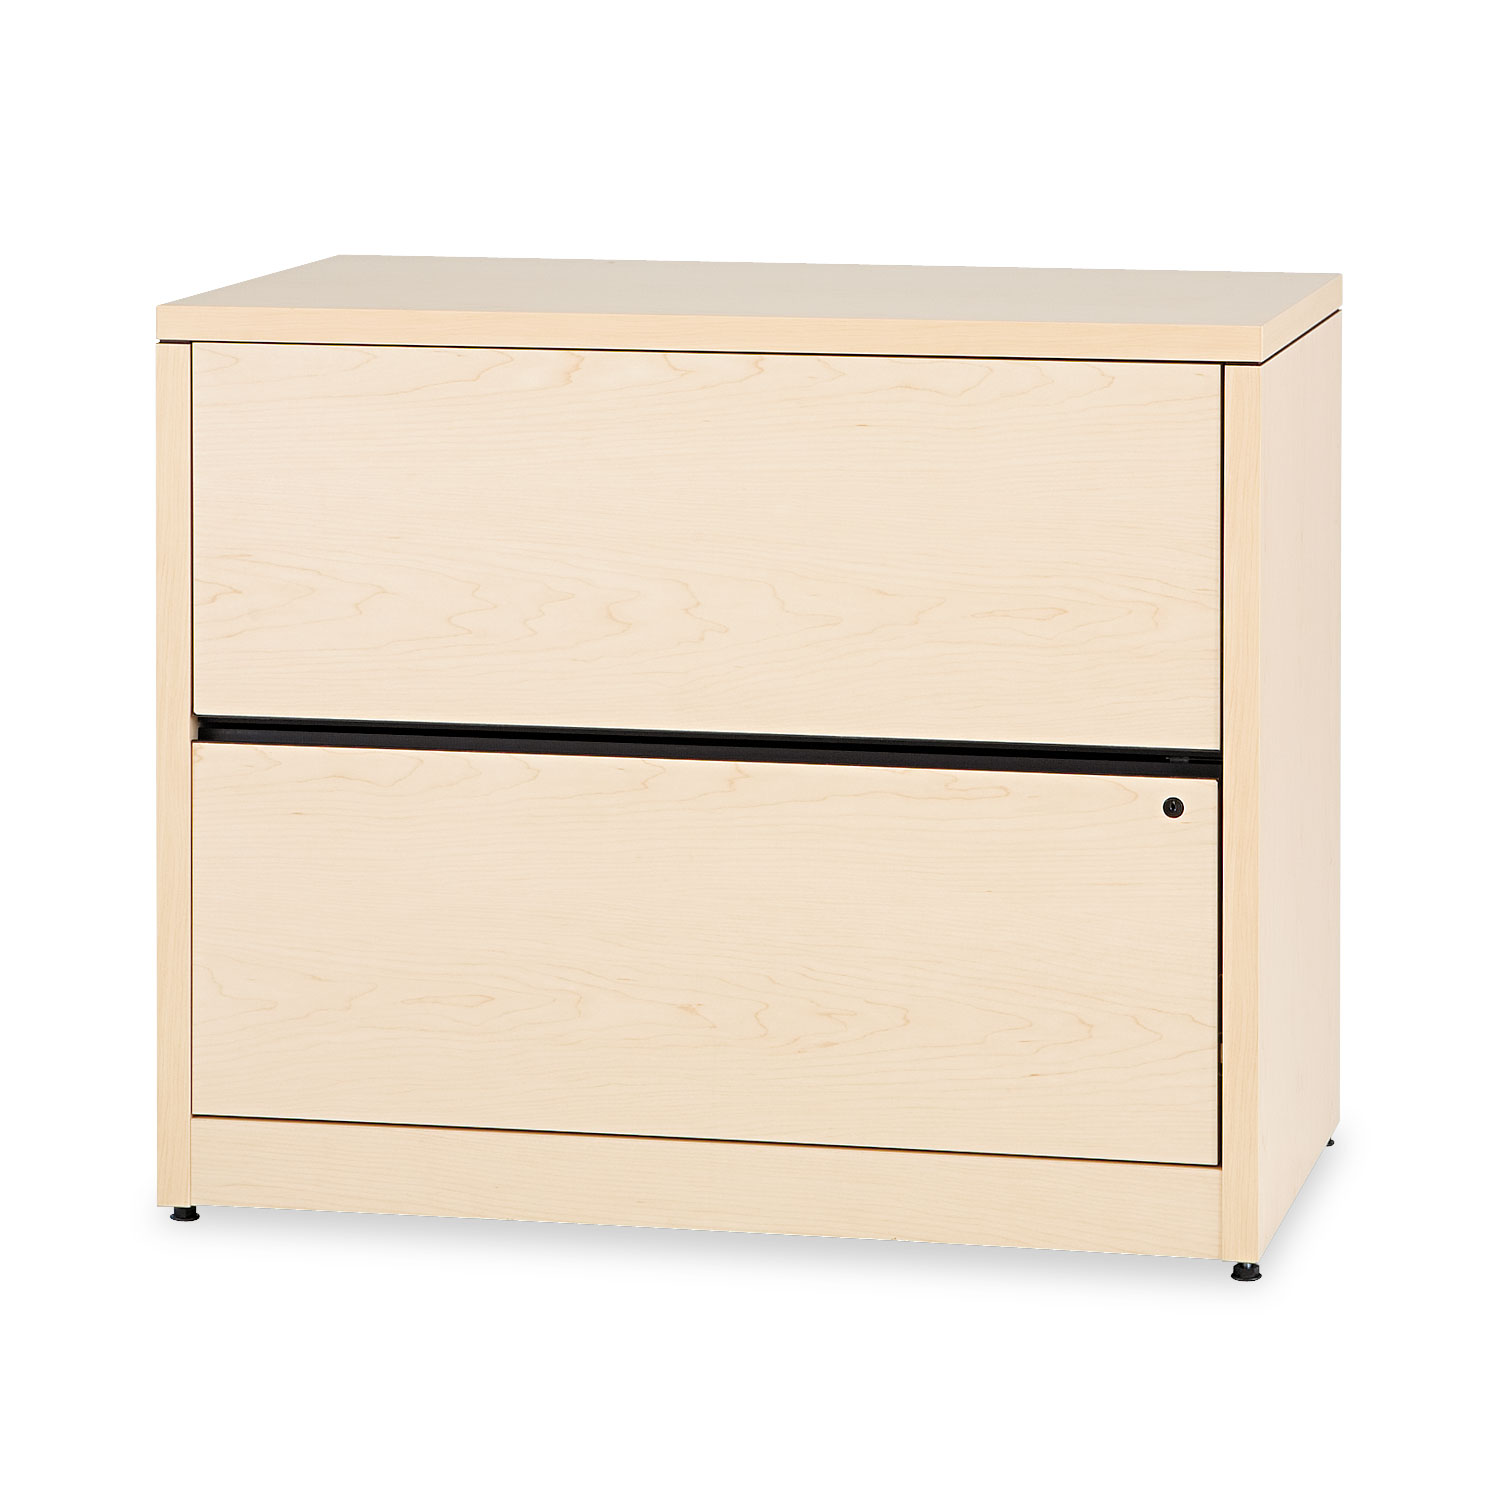  HON H10563.DD 10500 Series Two-Drawer Lateral File, 36w x 20d x 29.5h, Natural Maple (HON10563DD) 